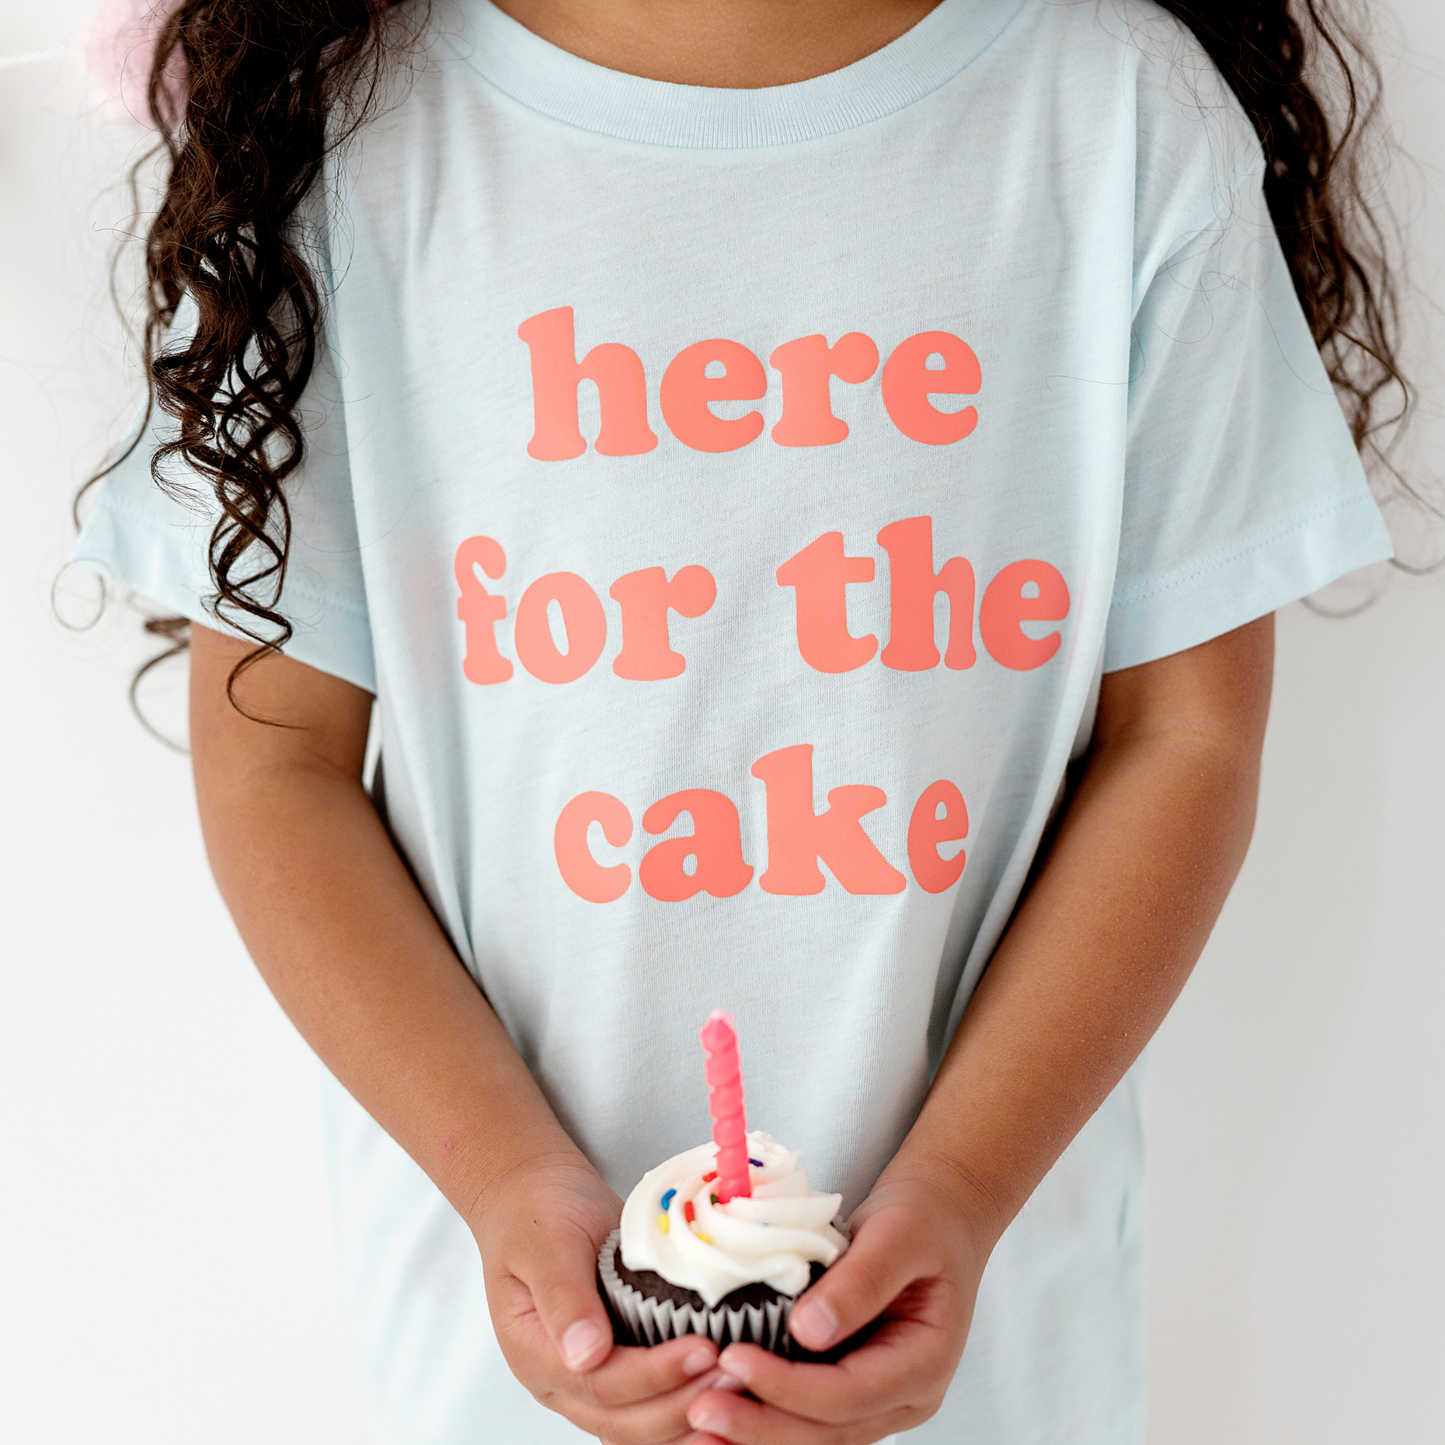 Here for the Cake Birthday Party Shirt, Ice Cream Party / Coral / Natural